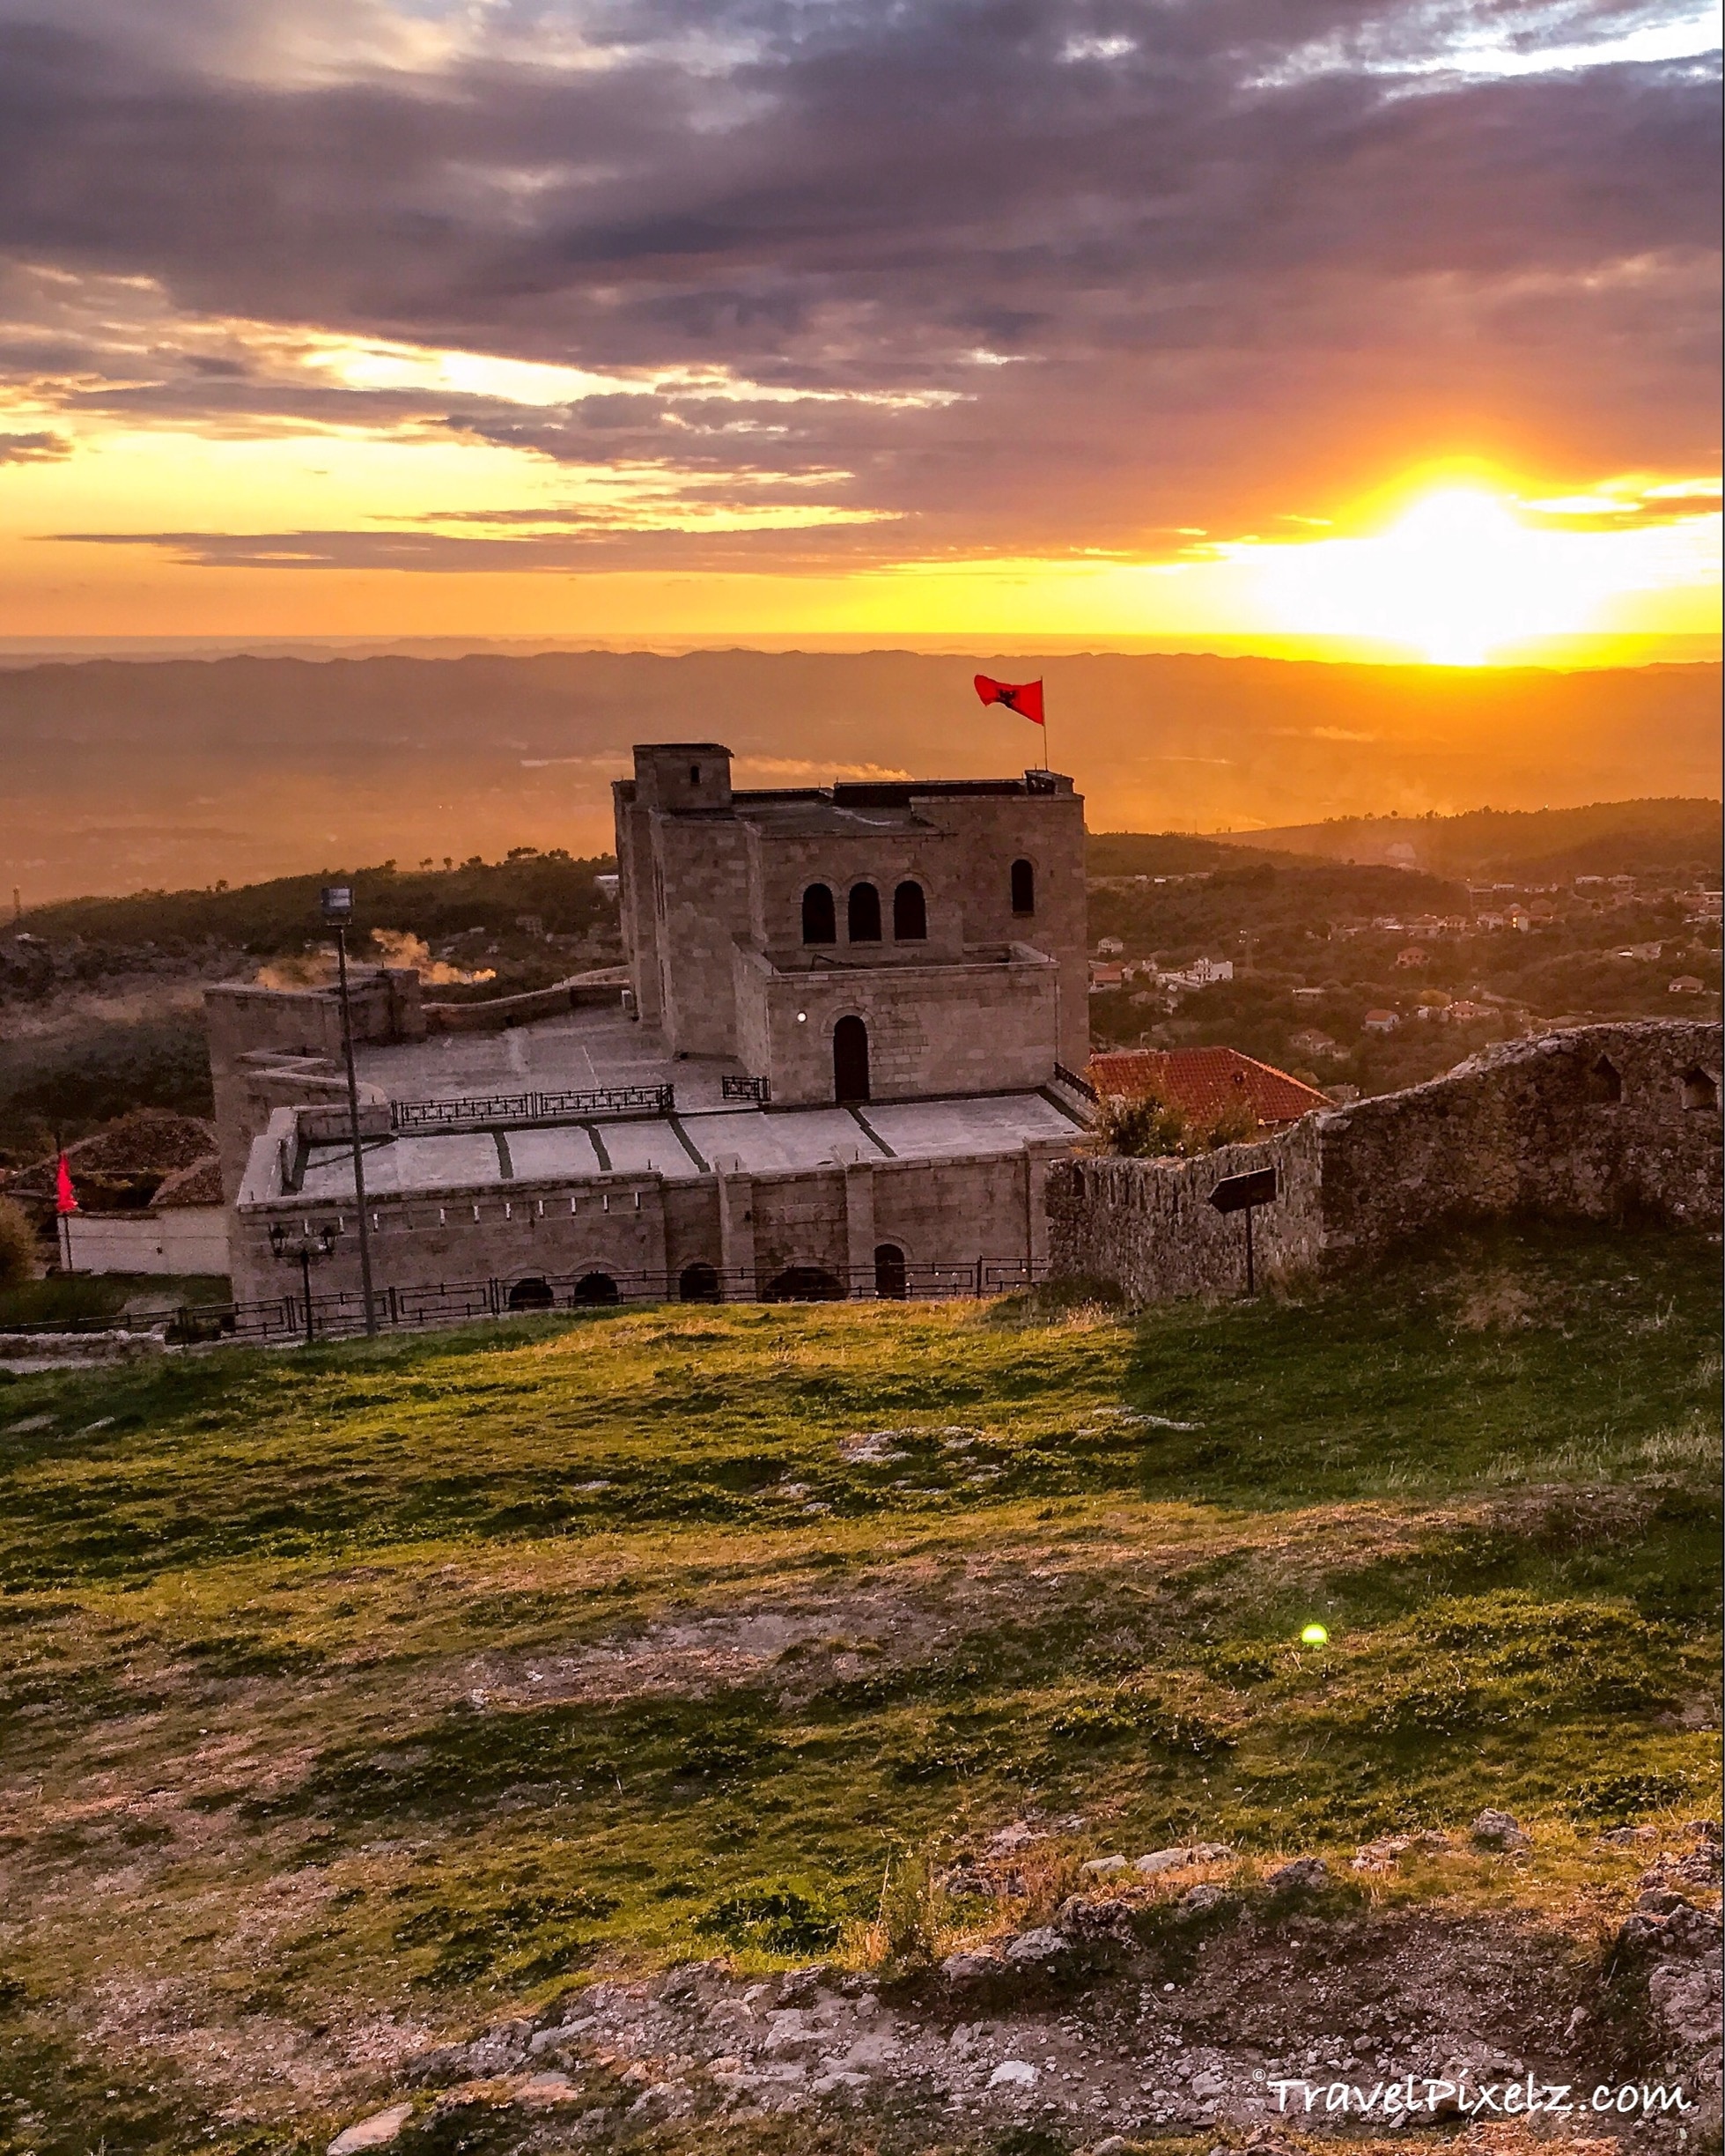 We spent the last evening of our Albanian road trip adventure in the city of Kruje. Not only were we super lucky with the accommodation (make sure to check out Panorama Hotel - awesome value for money) but we were also rewarded with epic sunset. If you climb up to the old tower, the views are breathtaking. 
#albania #kruje #skanderberg #sunset #architecture #goldenhour